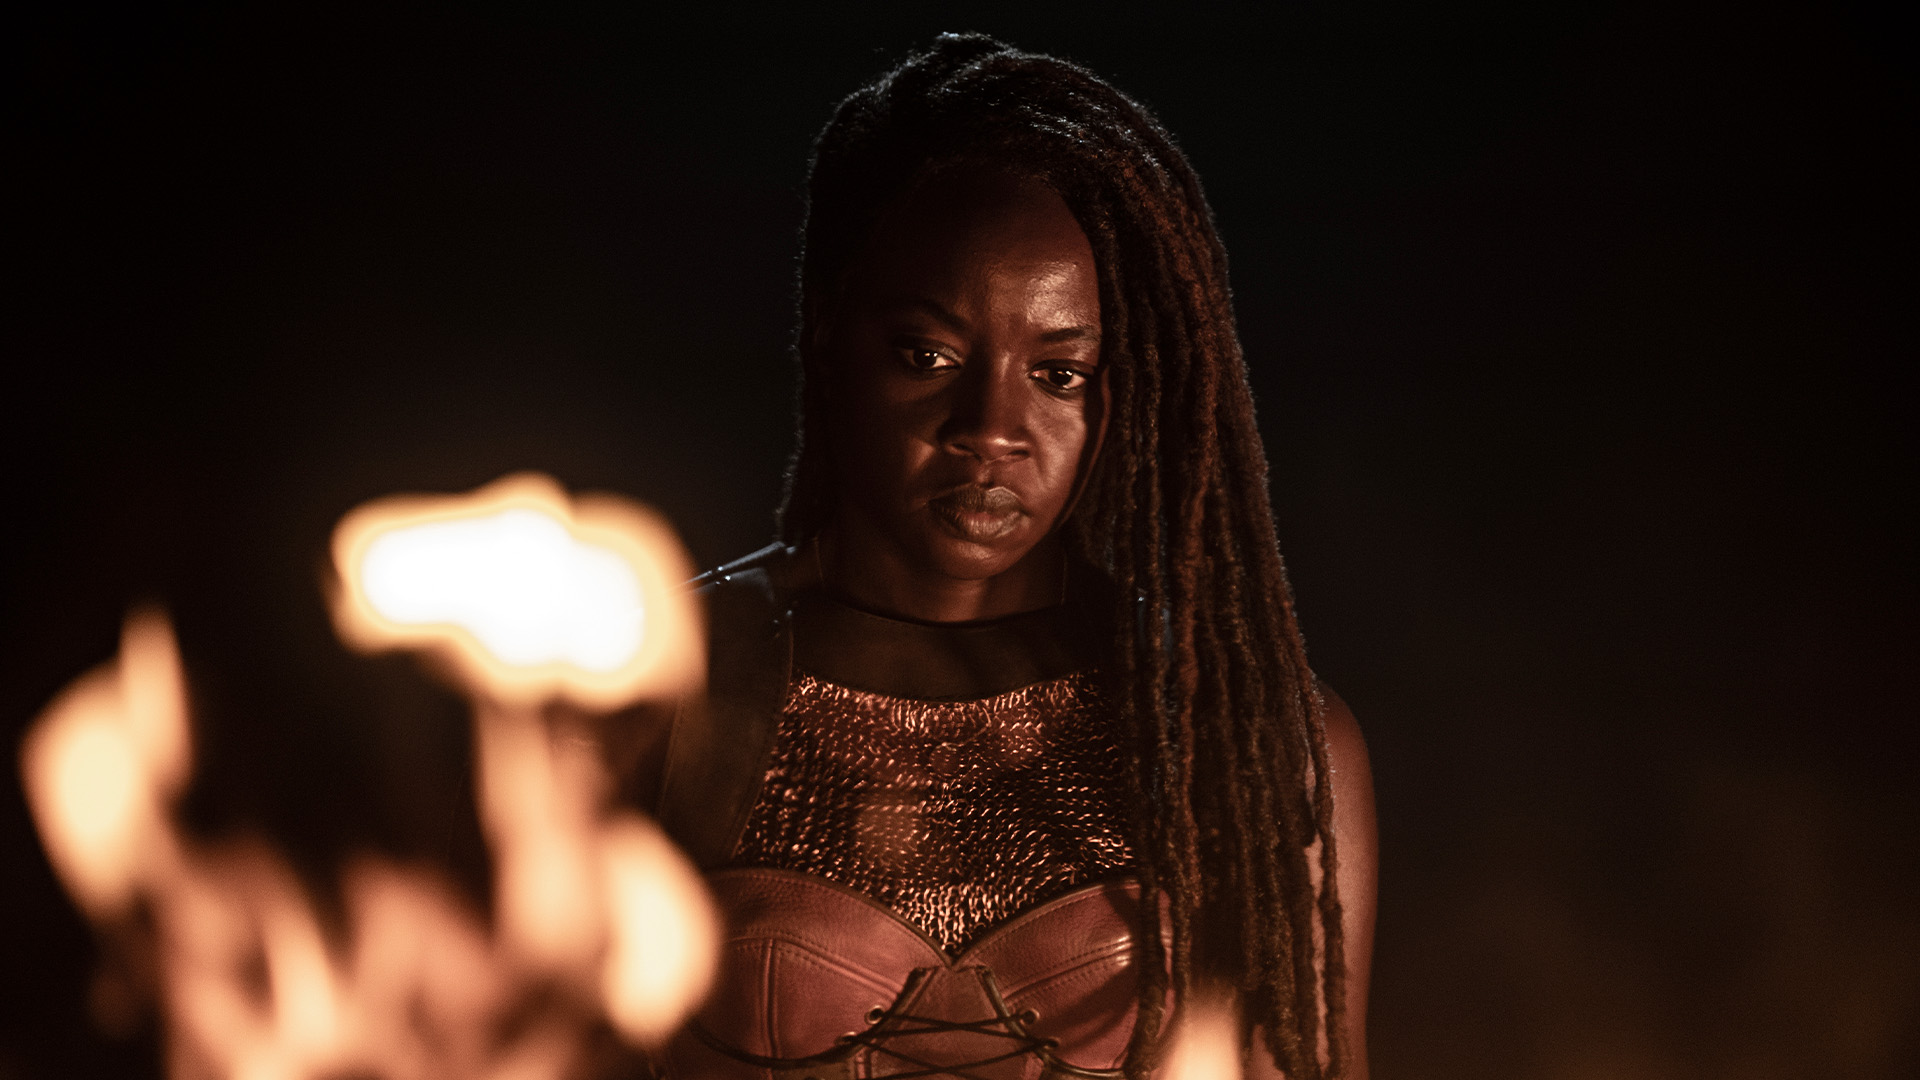 Rest in Peace: Best of Michonne Edition, Relive Michonne's best moments in this iconic episode from Season 11., Season 1066703, Episode 7